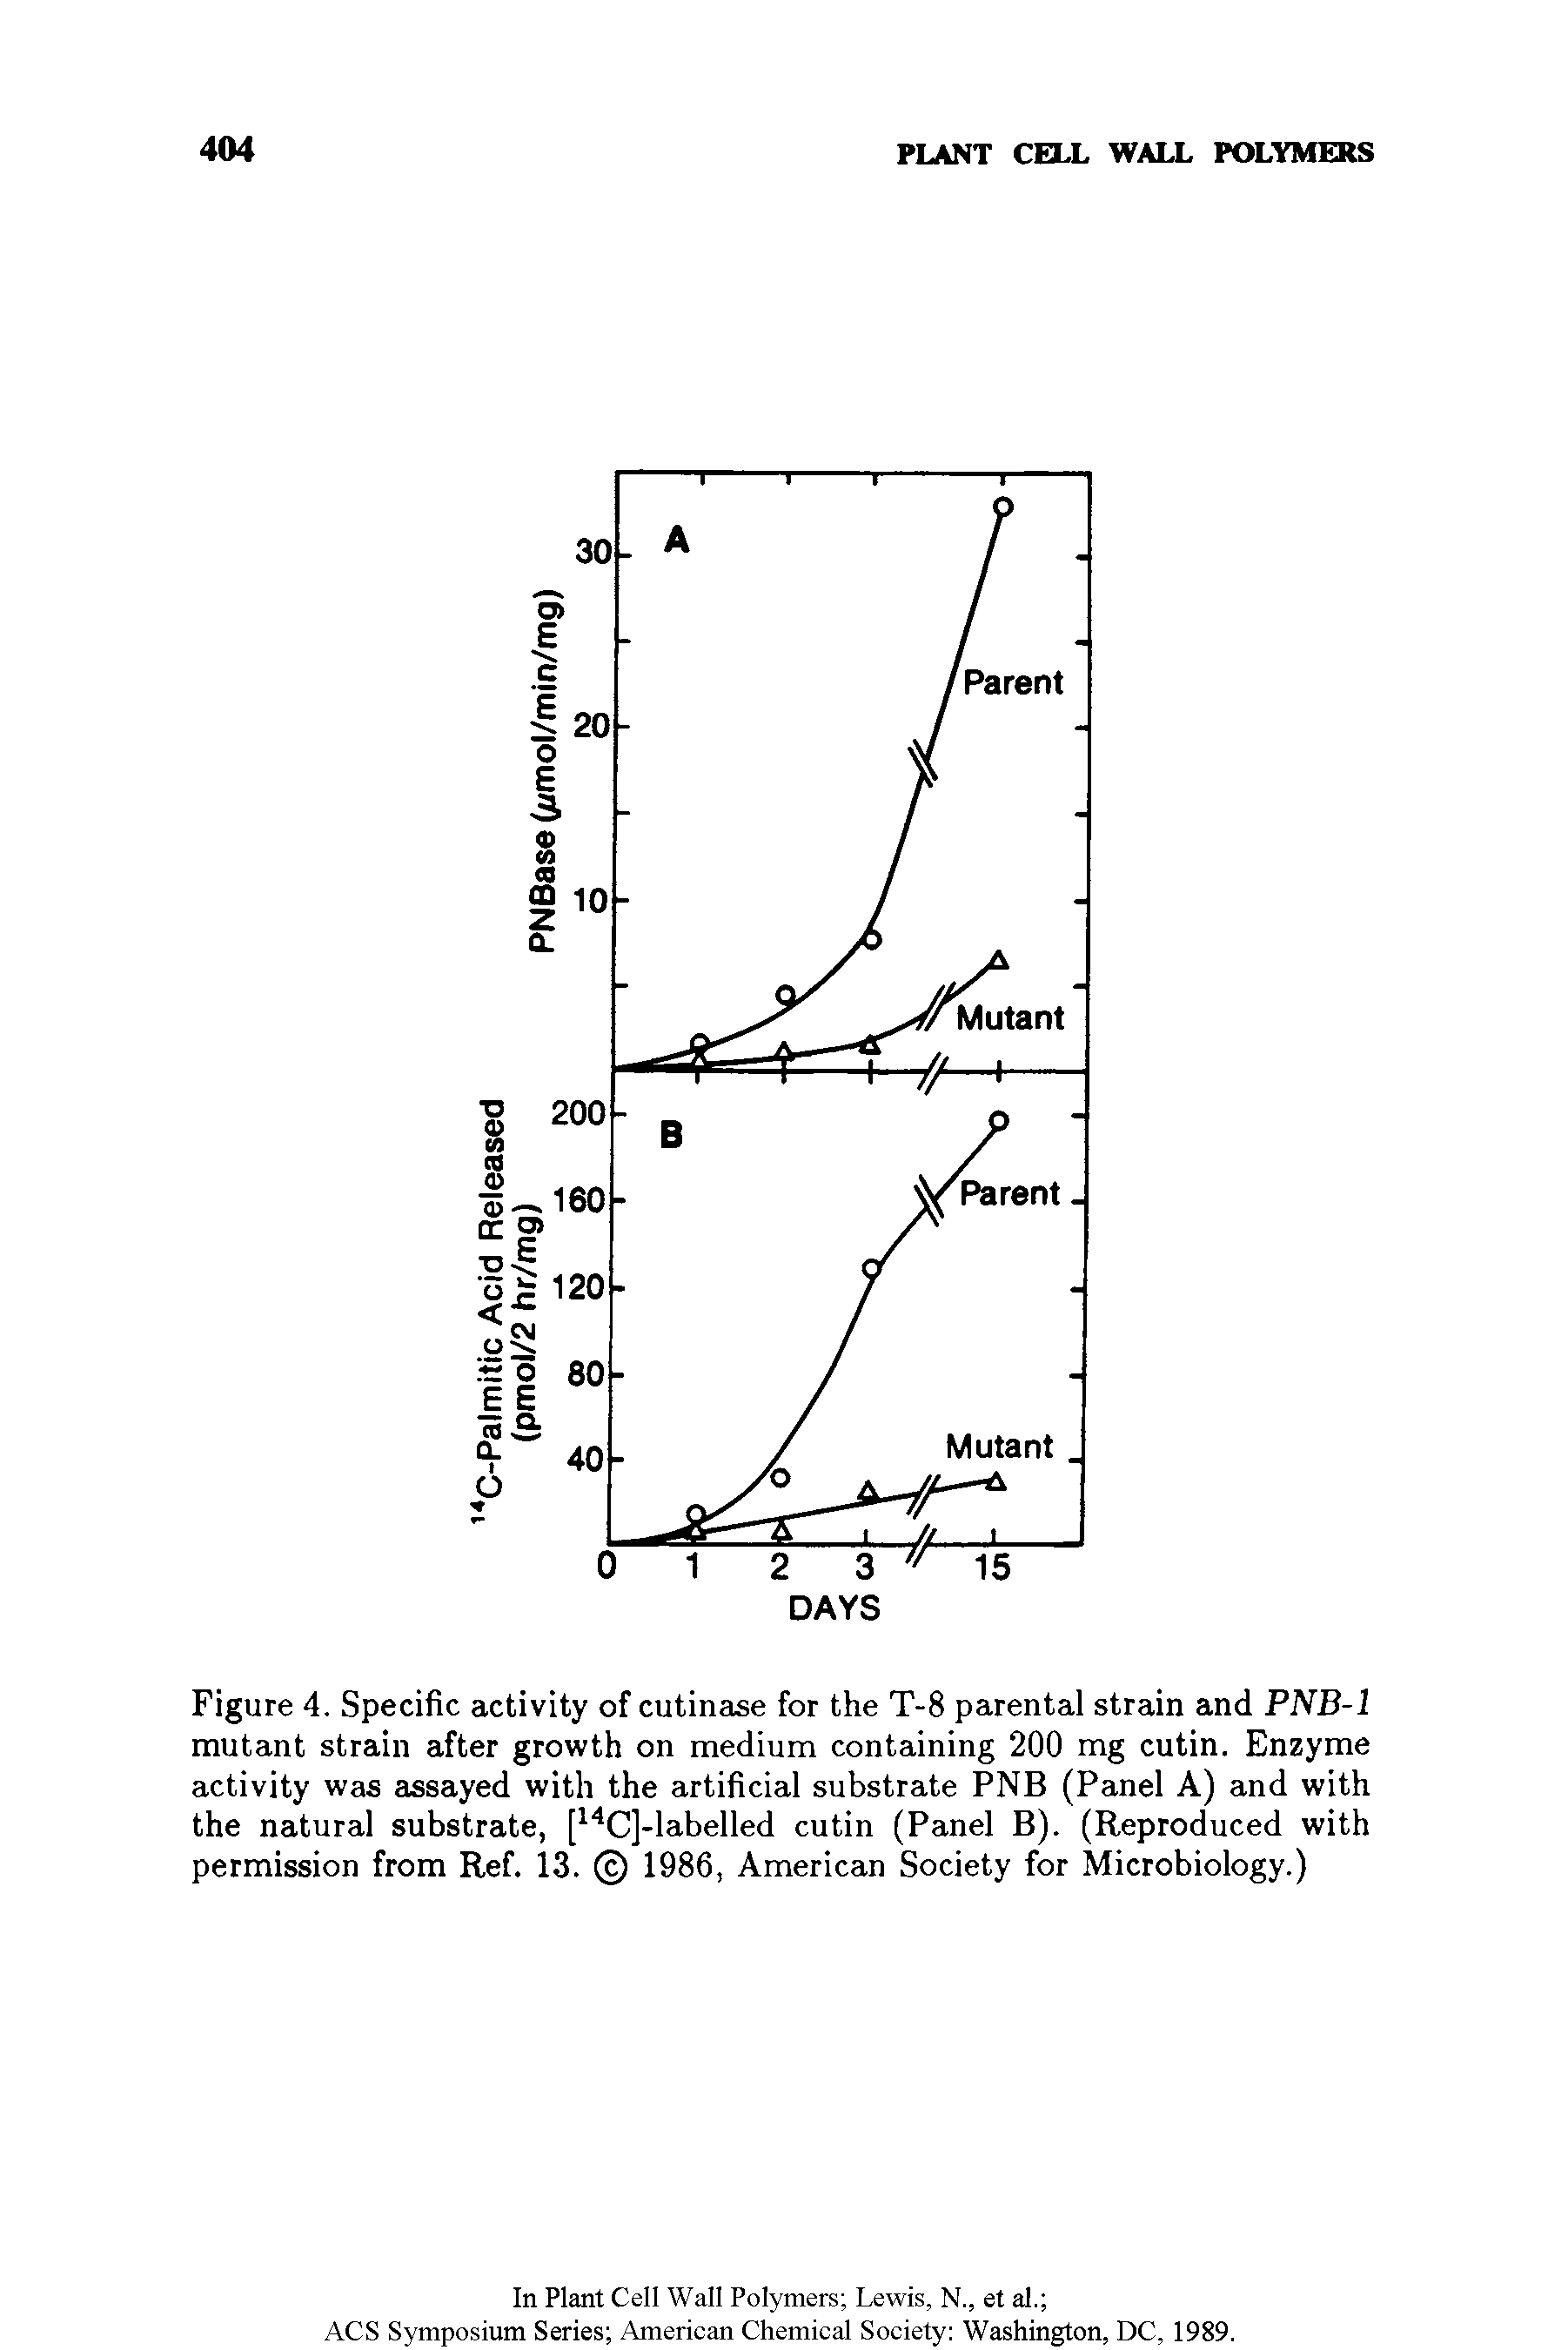 Figure 4. Specific activity of cutinase for the T-8 parental strain and PNB-1 mutant strain after growth on medium containing 200 mg cutin. Enzyme activity was assayed with the artificial substrate PNB (Panel A) and with the natural substrate, [14C]-labelled cutin (Panel B). (Reproduced with permission from Ref. 13. 1986, American Society for Microbiology.)...